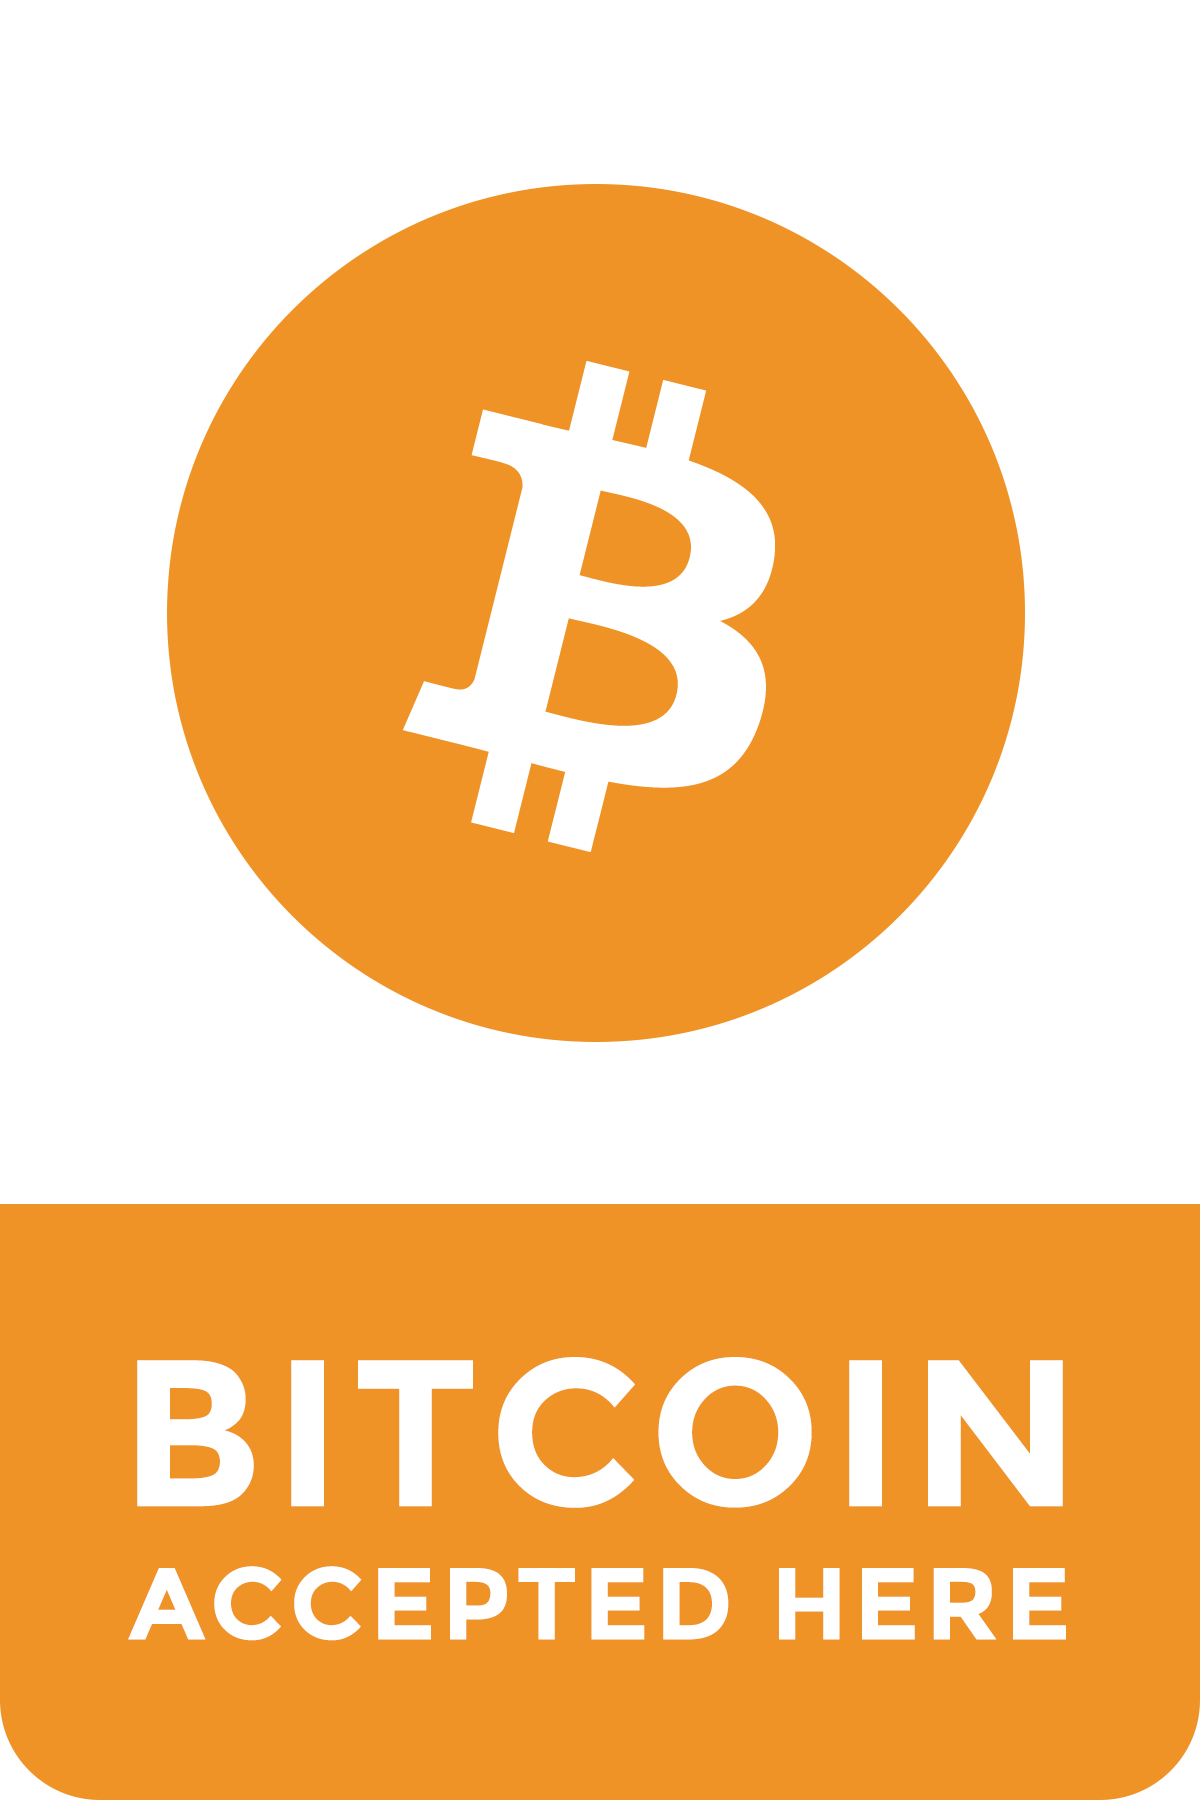 File:Bitcoin accepted here sign2.png